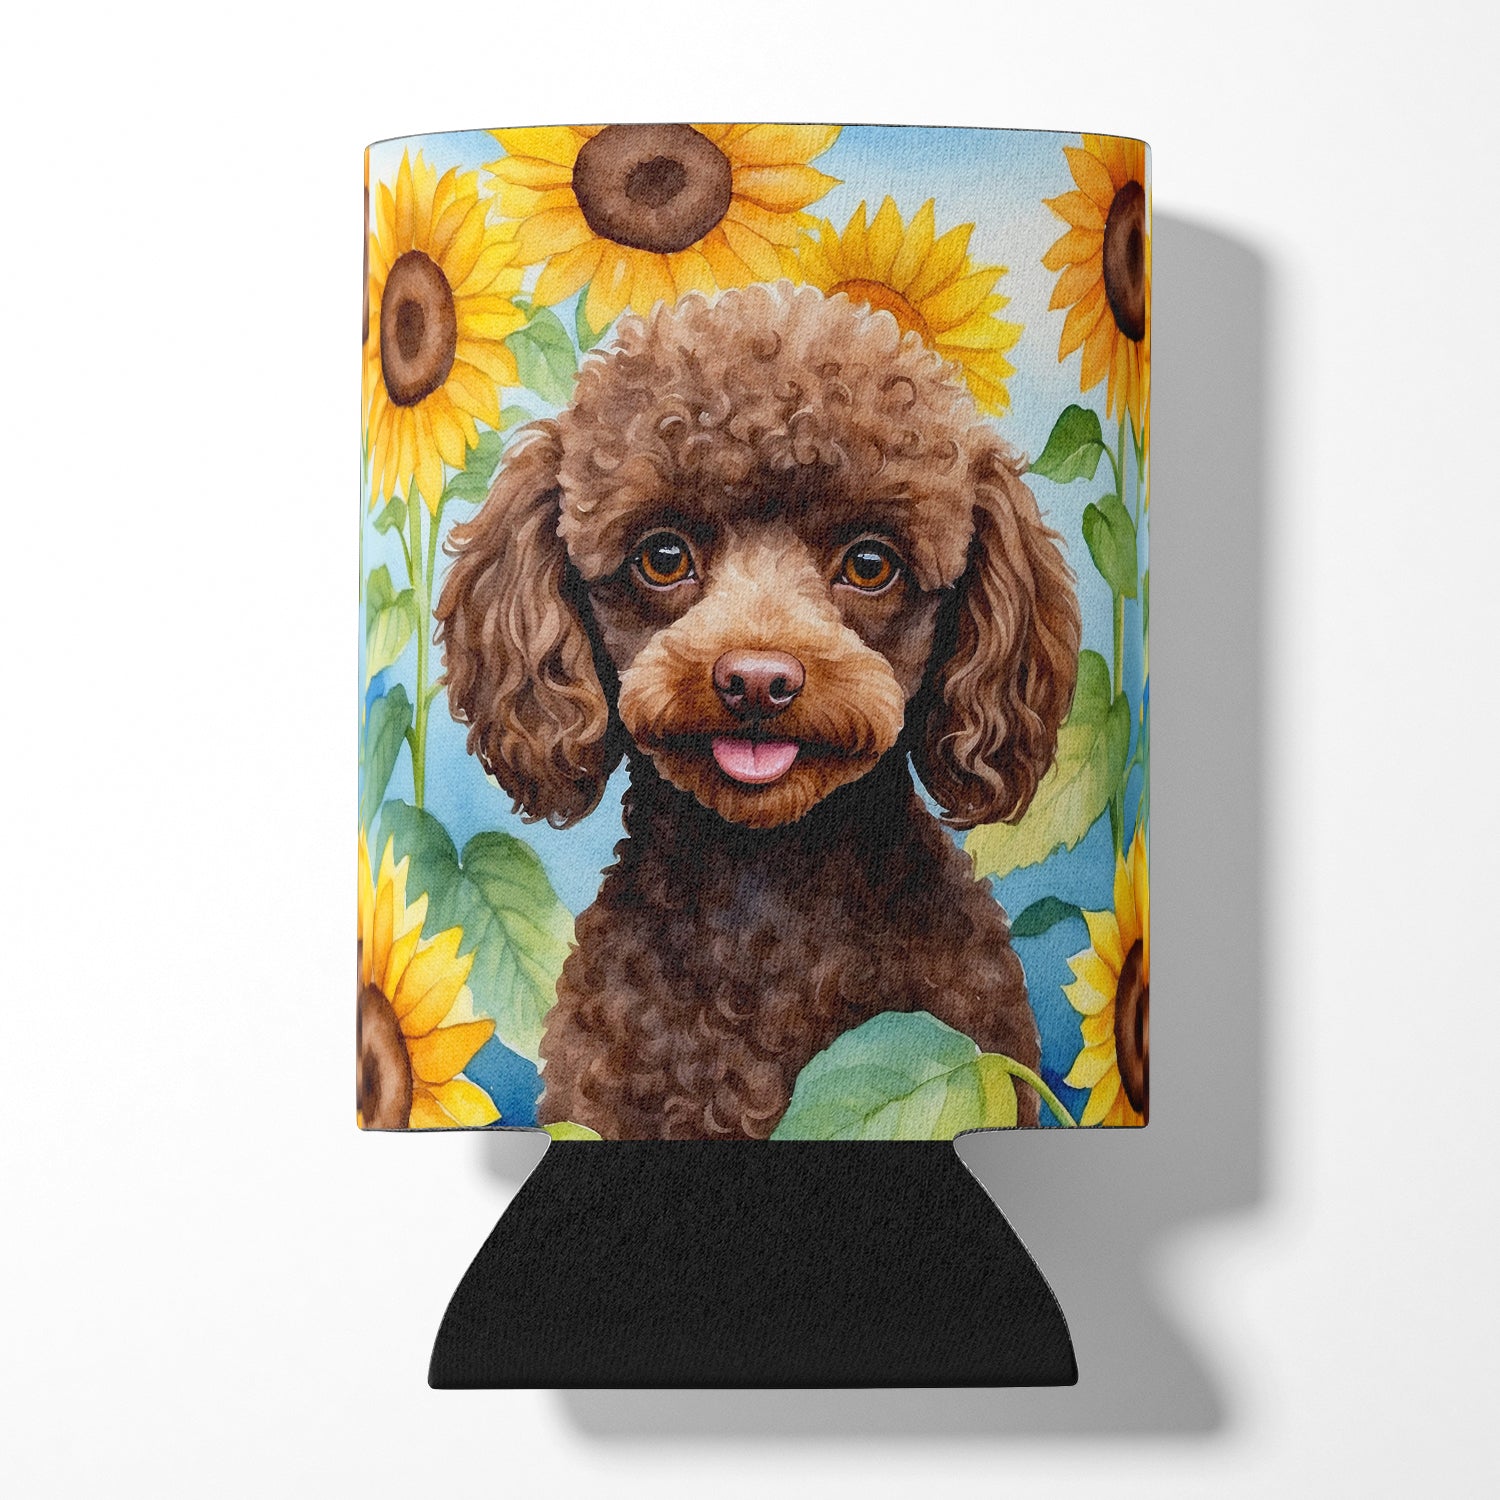 Buy this Chocolate Poodle in Sunflowers Can or Bottle Hugger